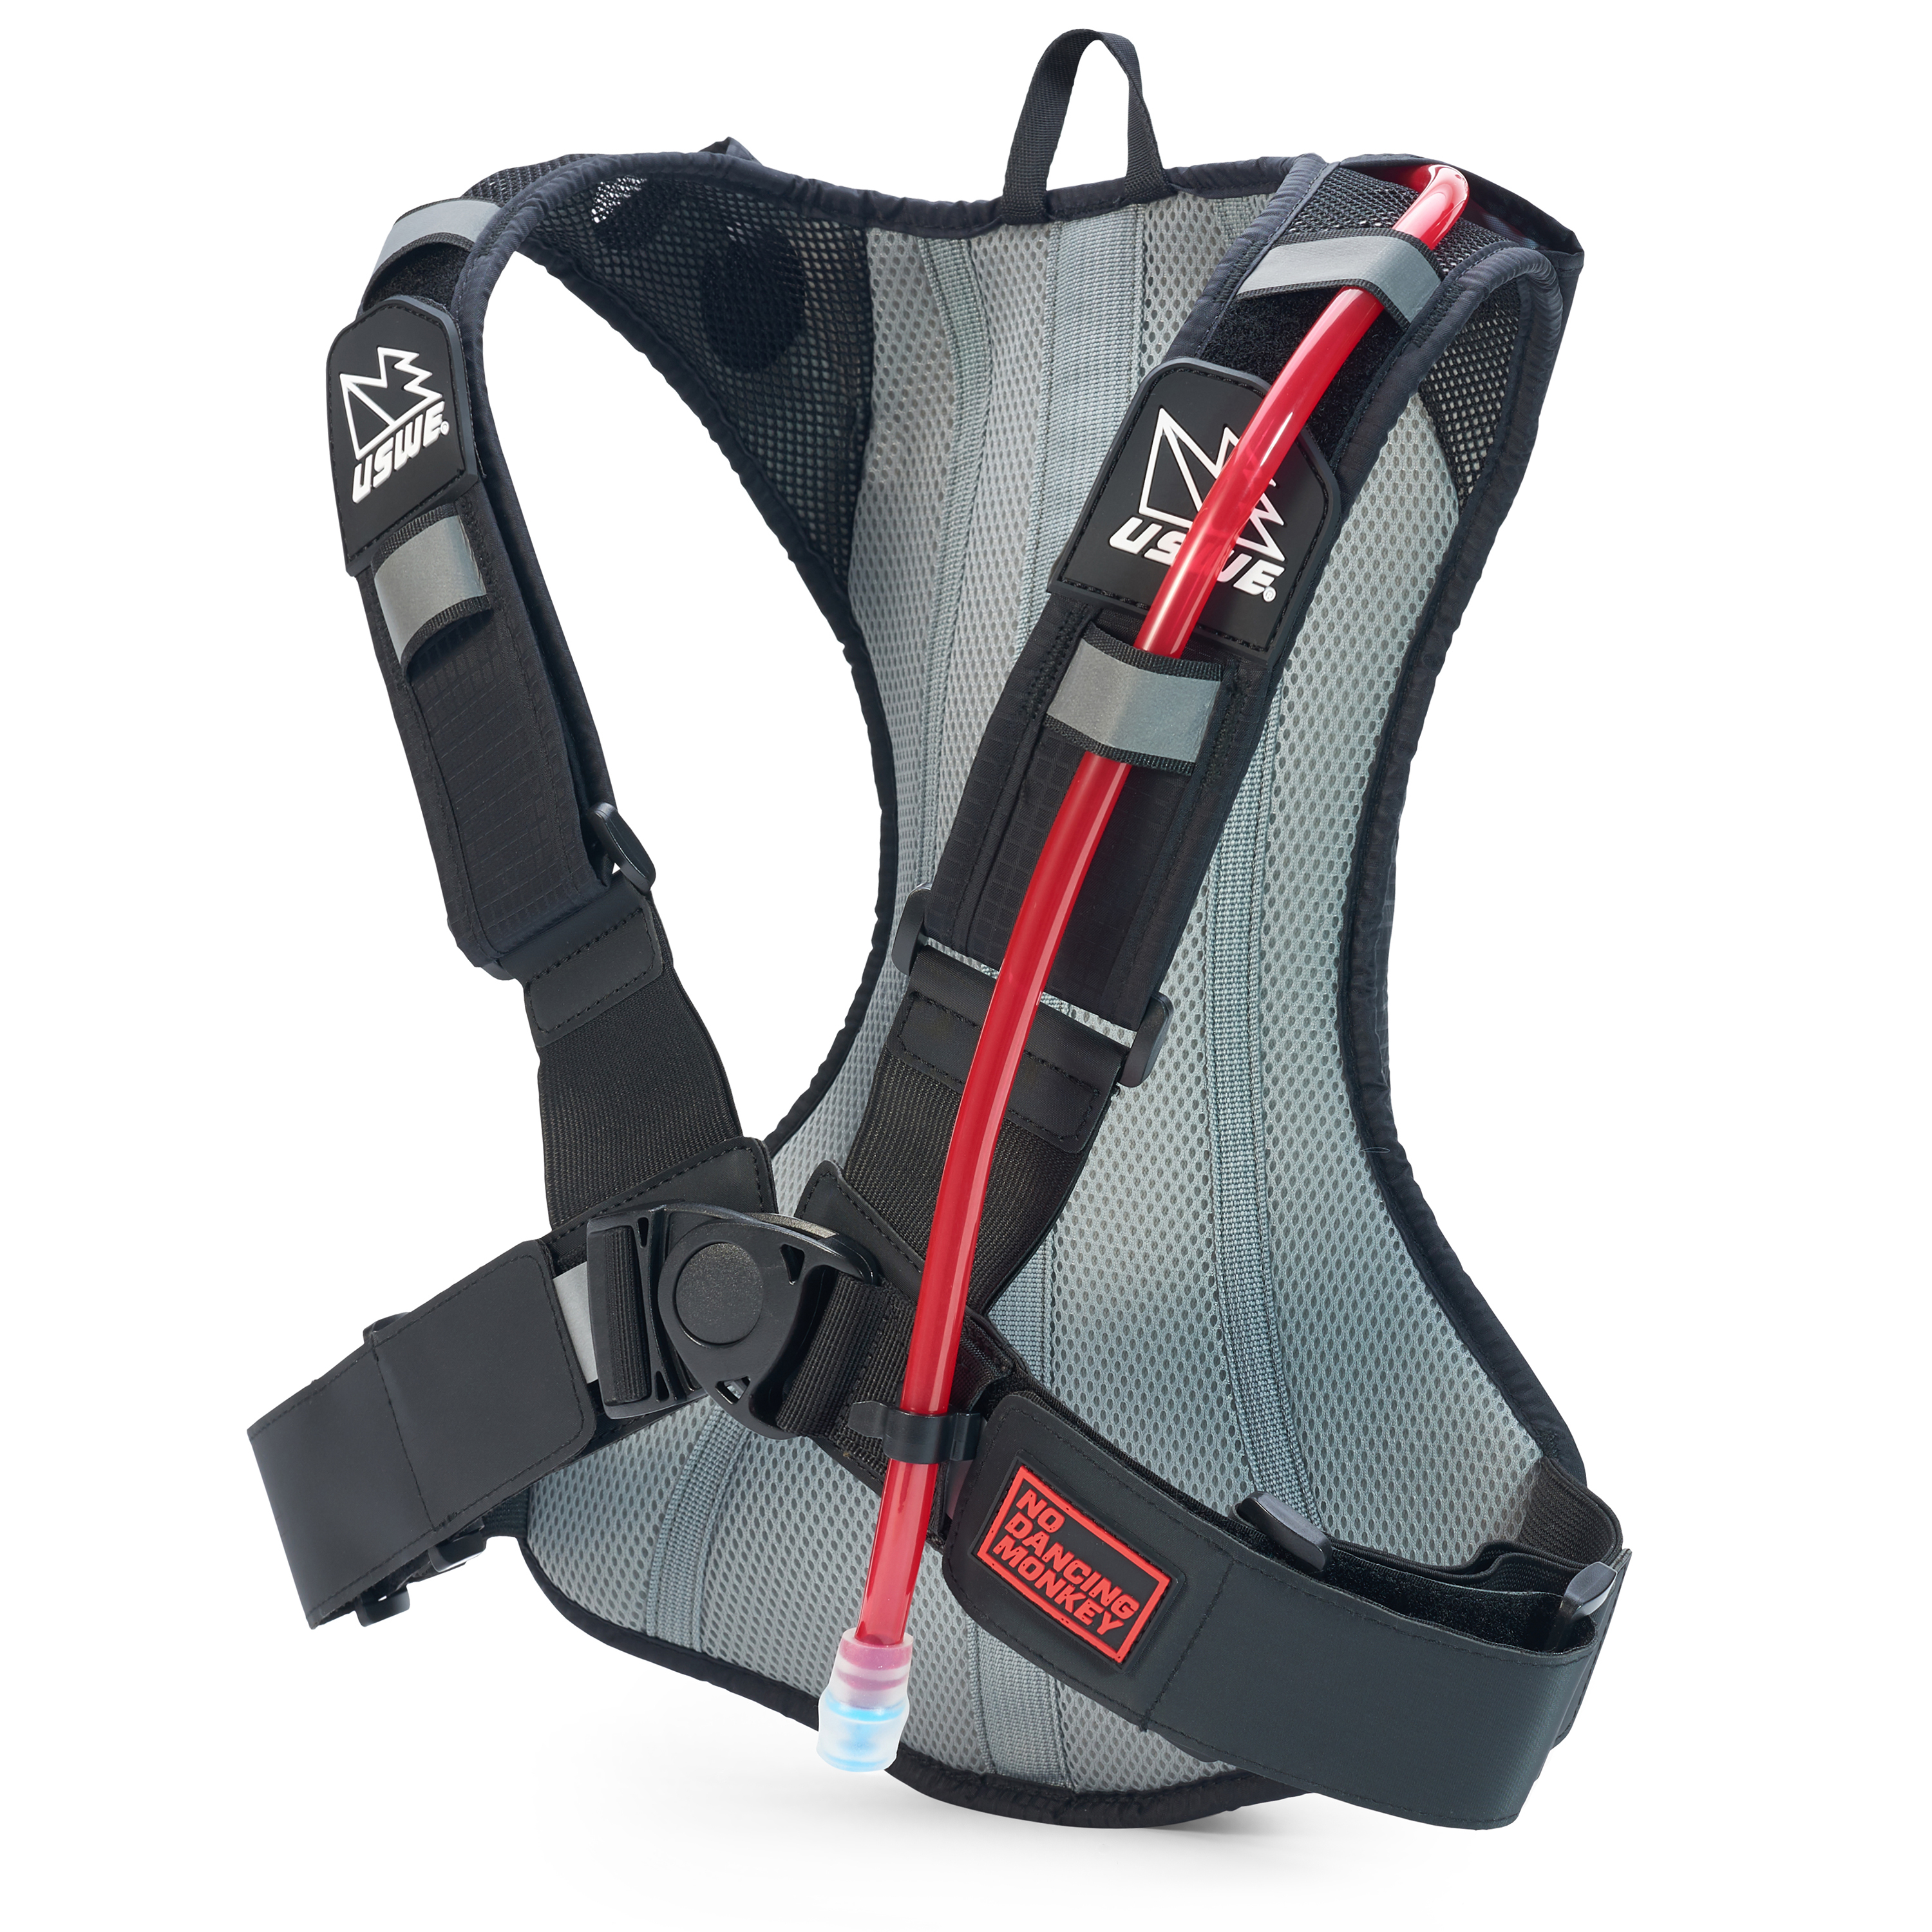 Outlander 4 3.0L Hydration Pack System Black - Click Image to Close